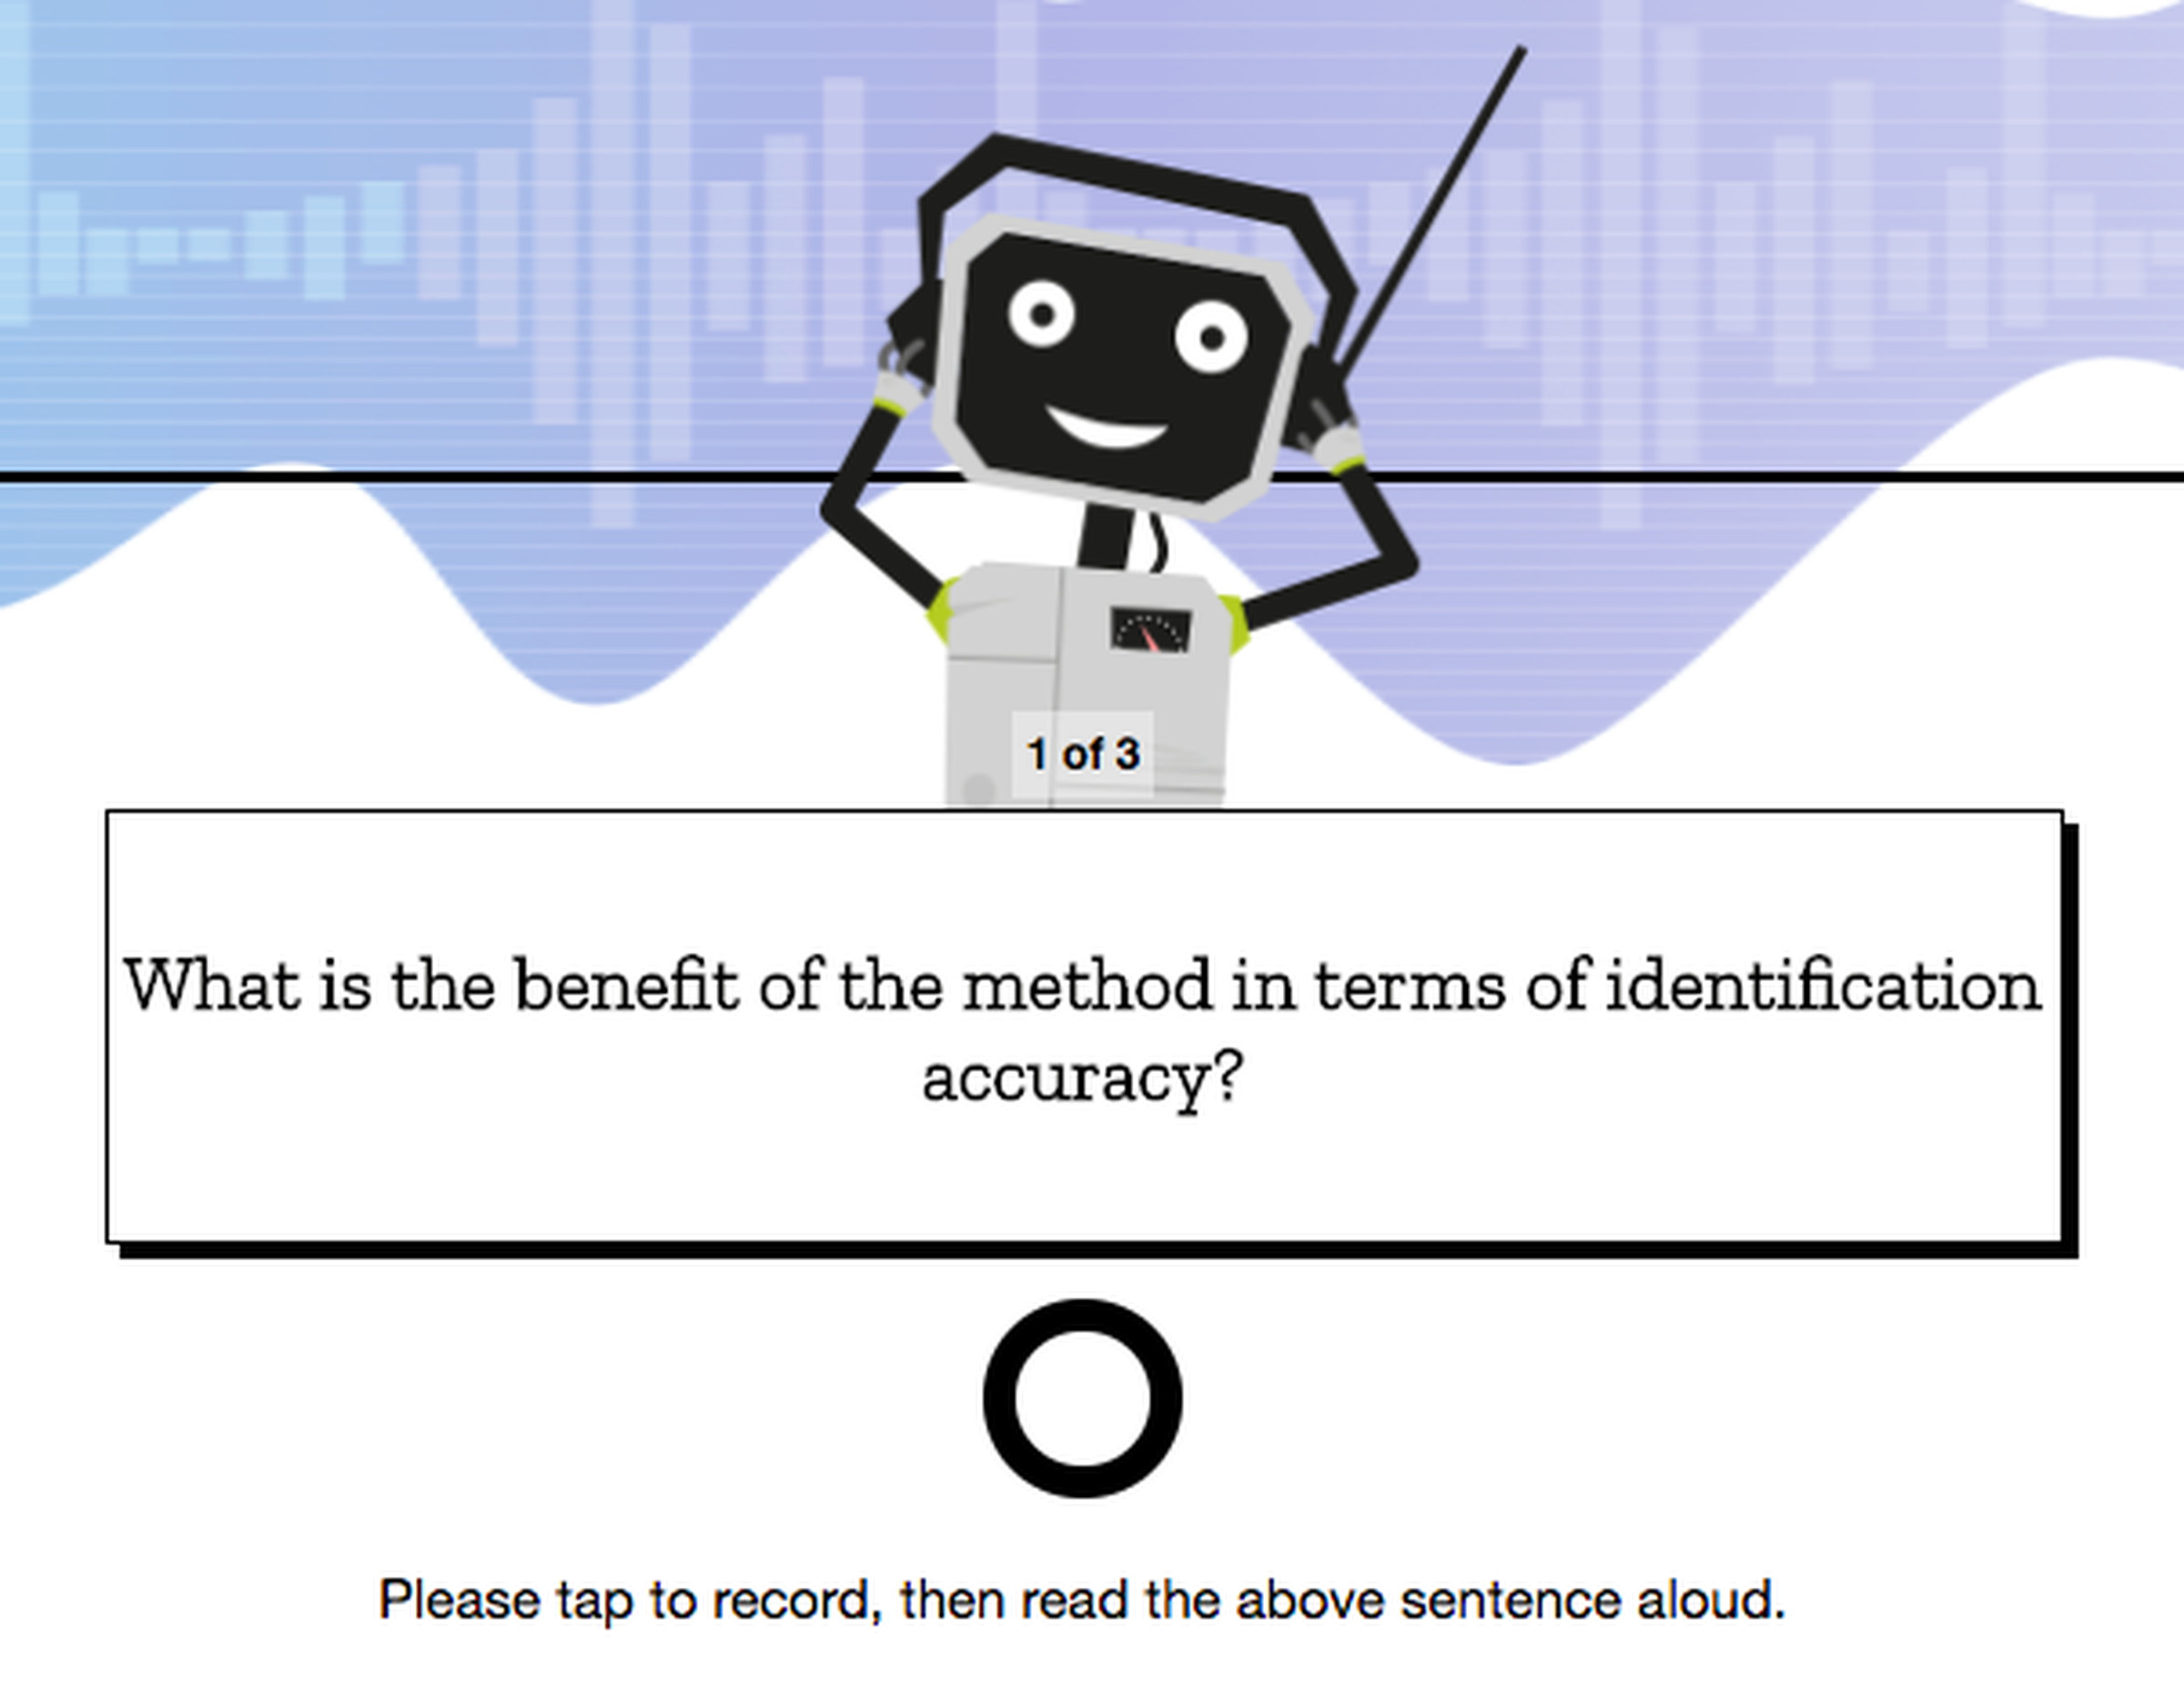 Mozilla’s Common Voice project asks volunteers to read out sample sentences like the one above.